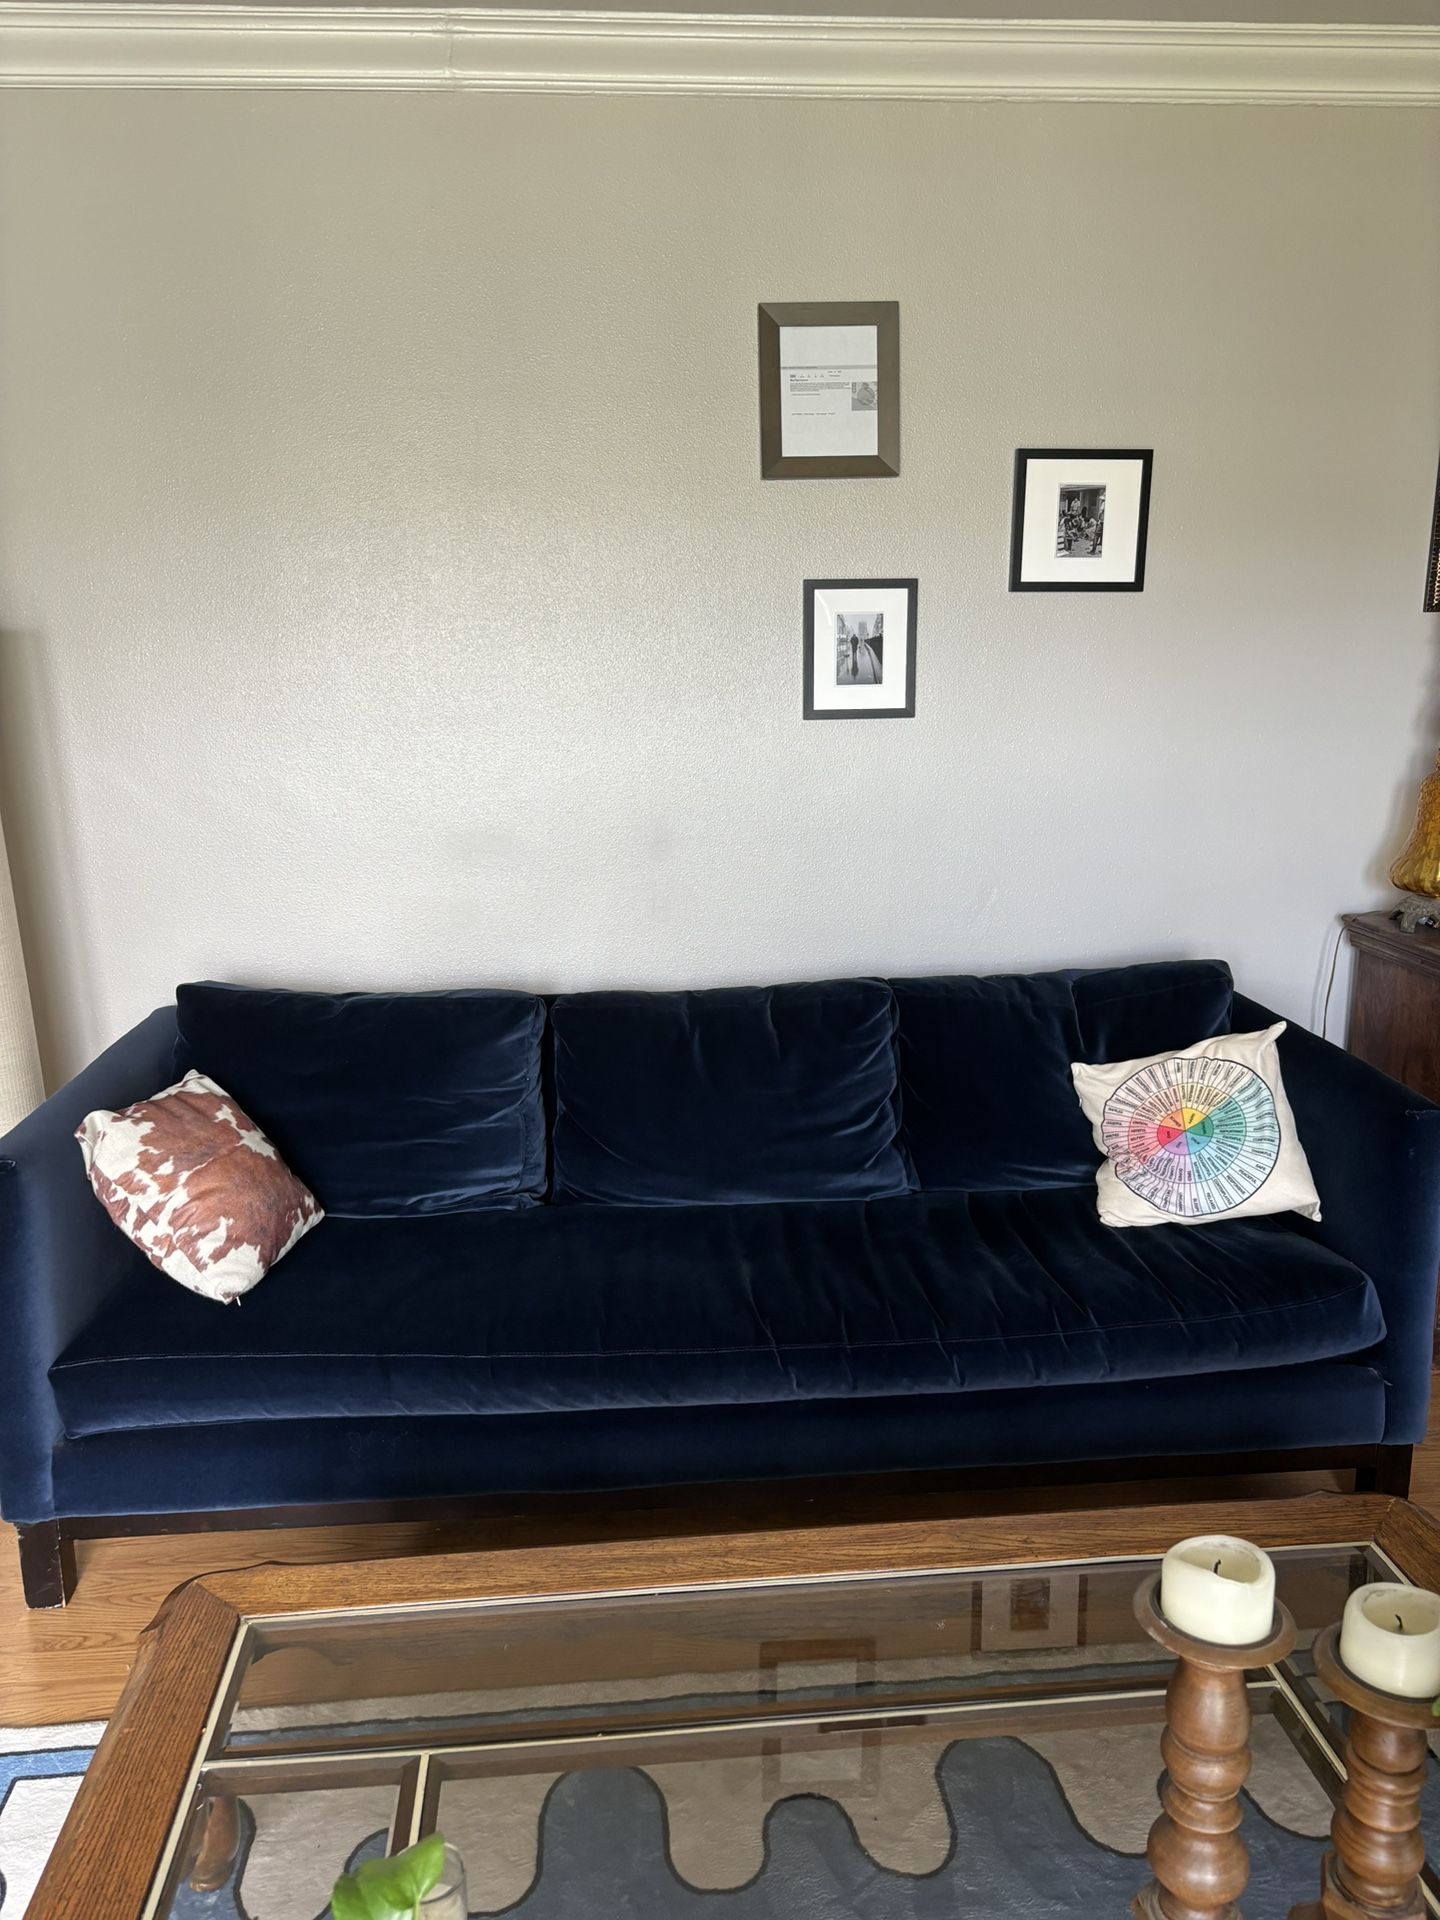 INSANELY DISCOUNTED ABC Home Cobble Hill Prescott Sofa WOULD DO $800 IF PICKUP THIS WEEK